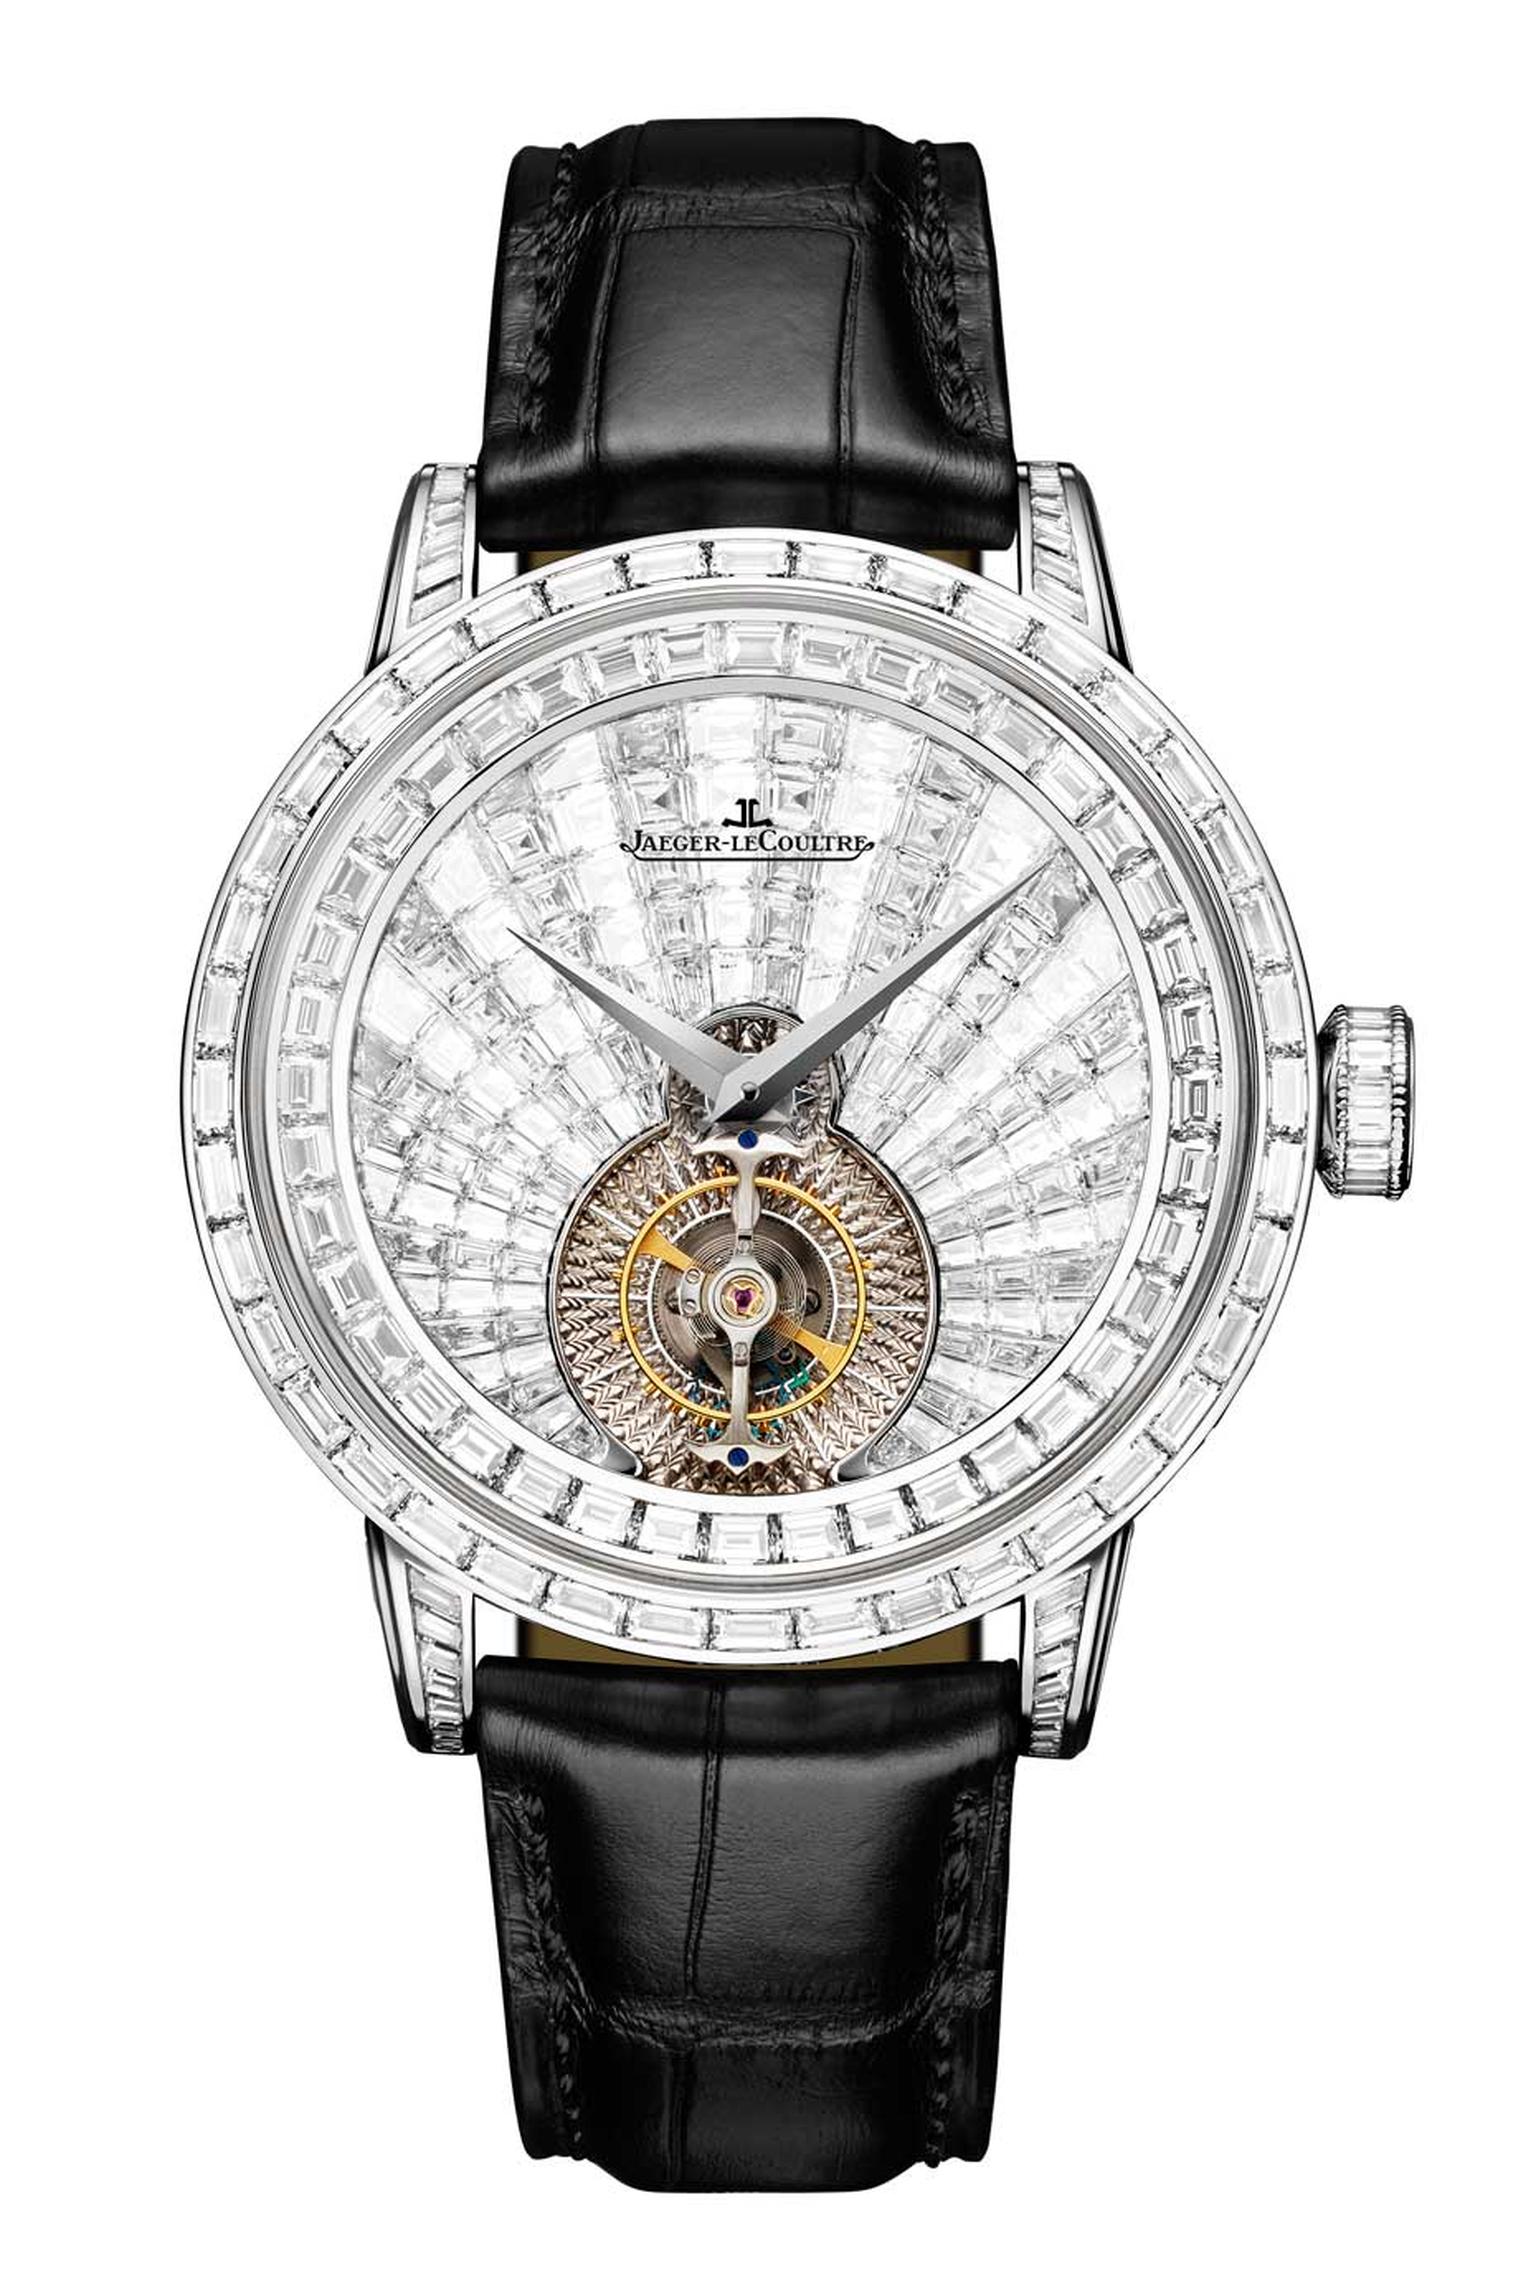 Jaeger-LeCoultre Master Grande Tradition Tourbillon Orbital diamond watch was inspired by the Sun's fiery brilliance and recreated with a profusion of baguette-cut diamonds using a new pyramid-style setting. The tourbillon reproduces a sidereal day, majes